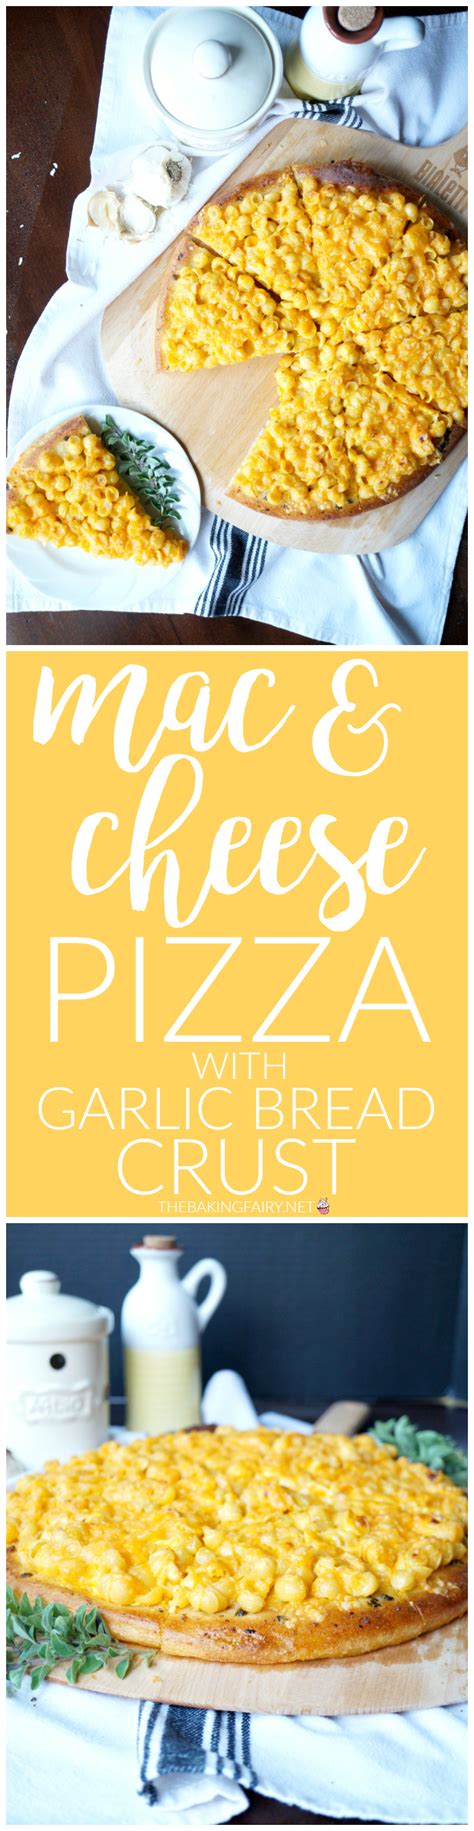 Mac And Cheese Pizza With Garlic Bread Crust The Baking Fairy